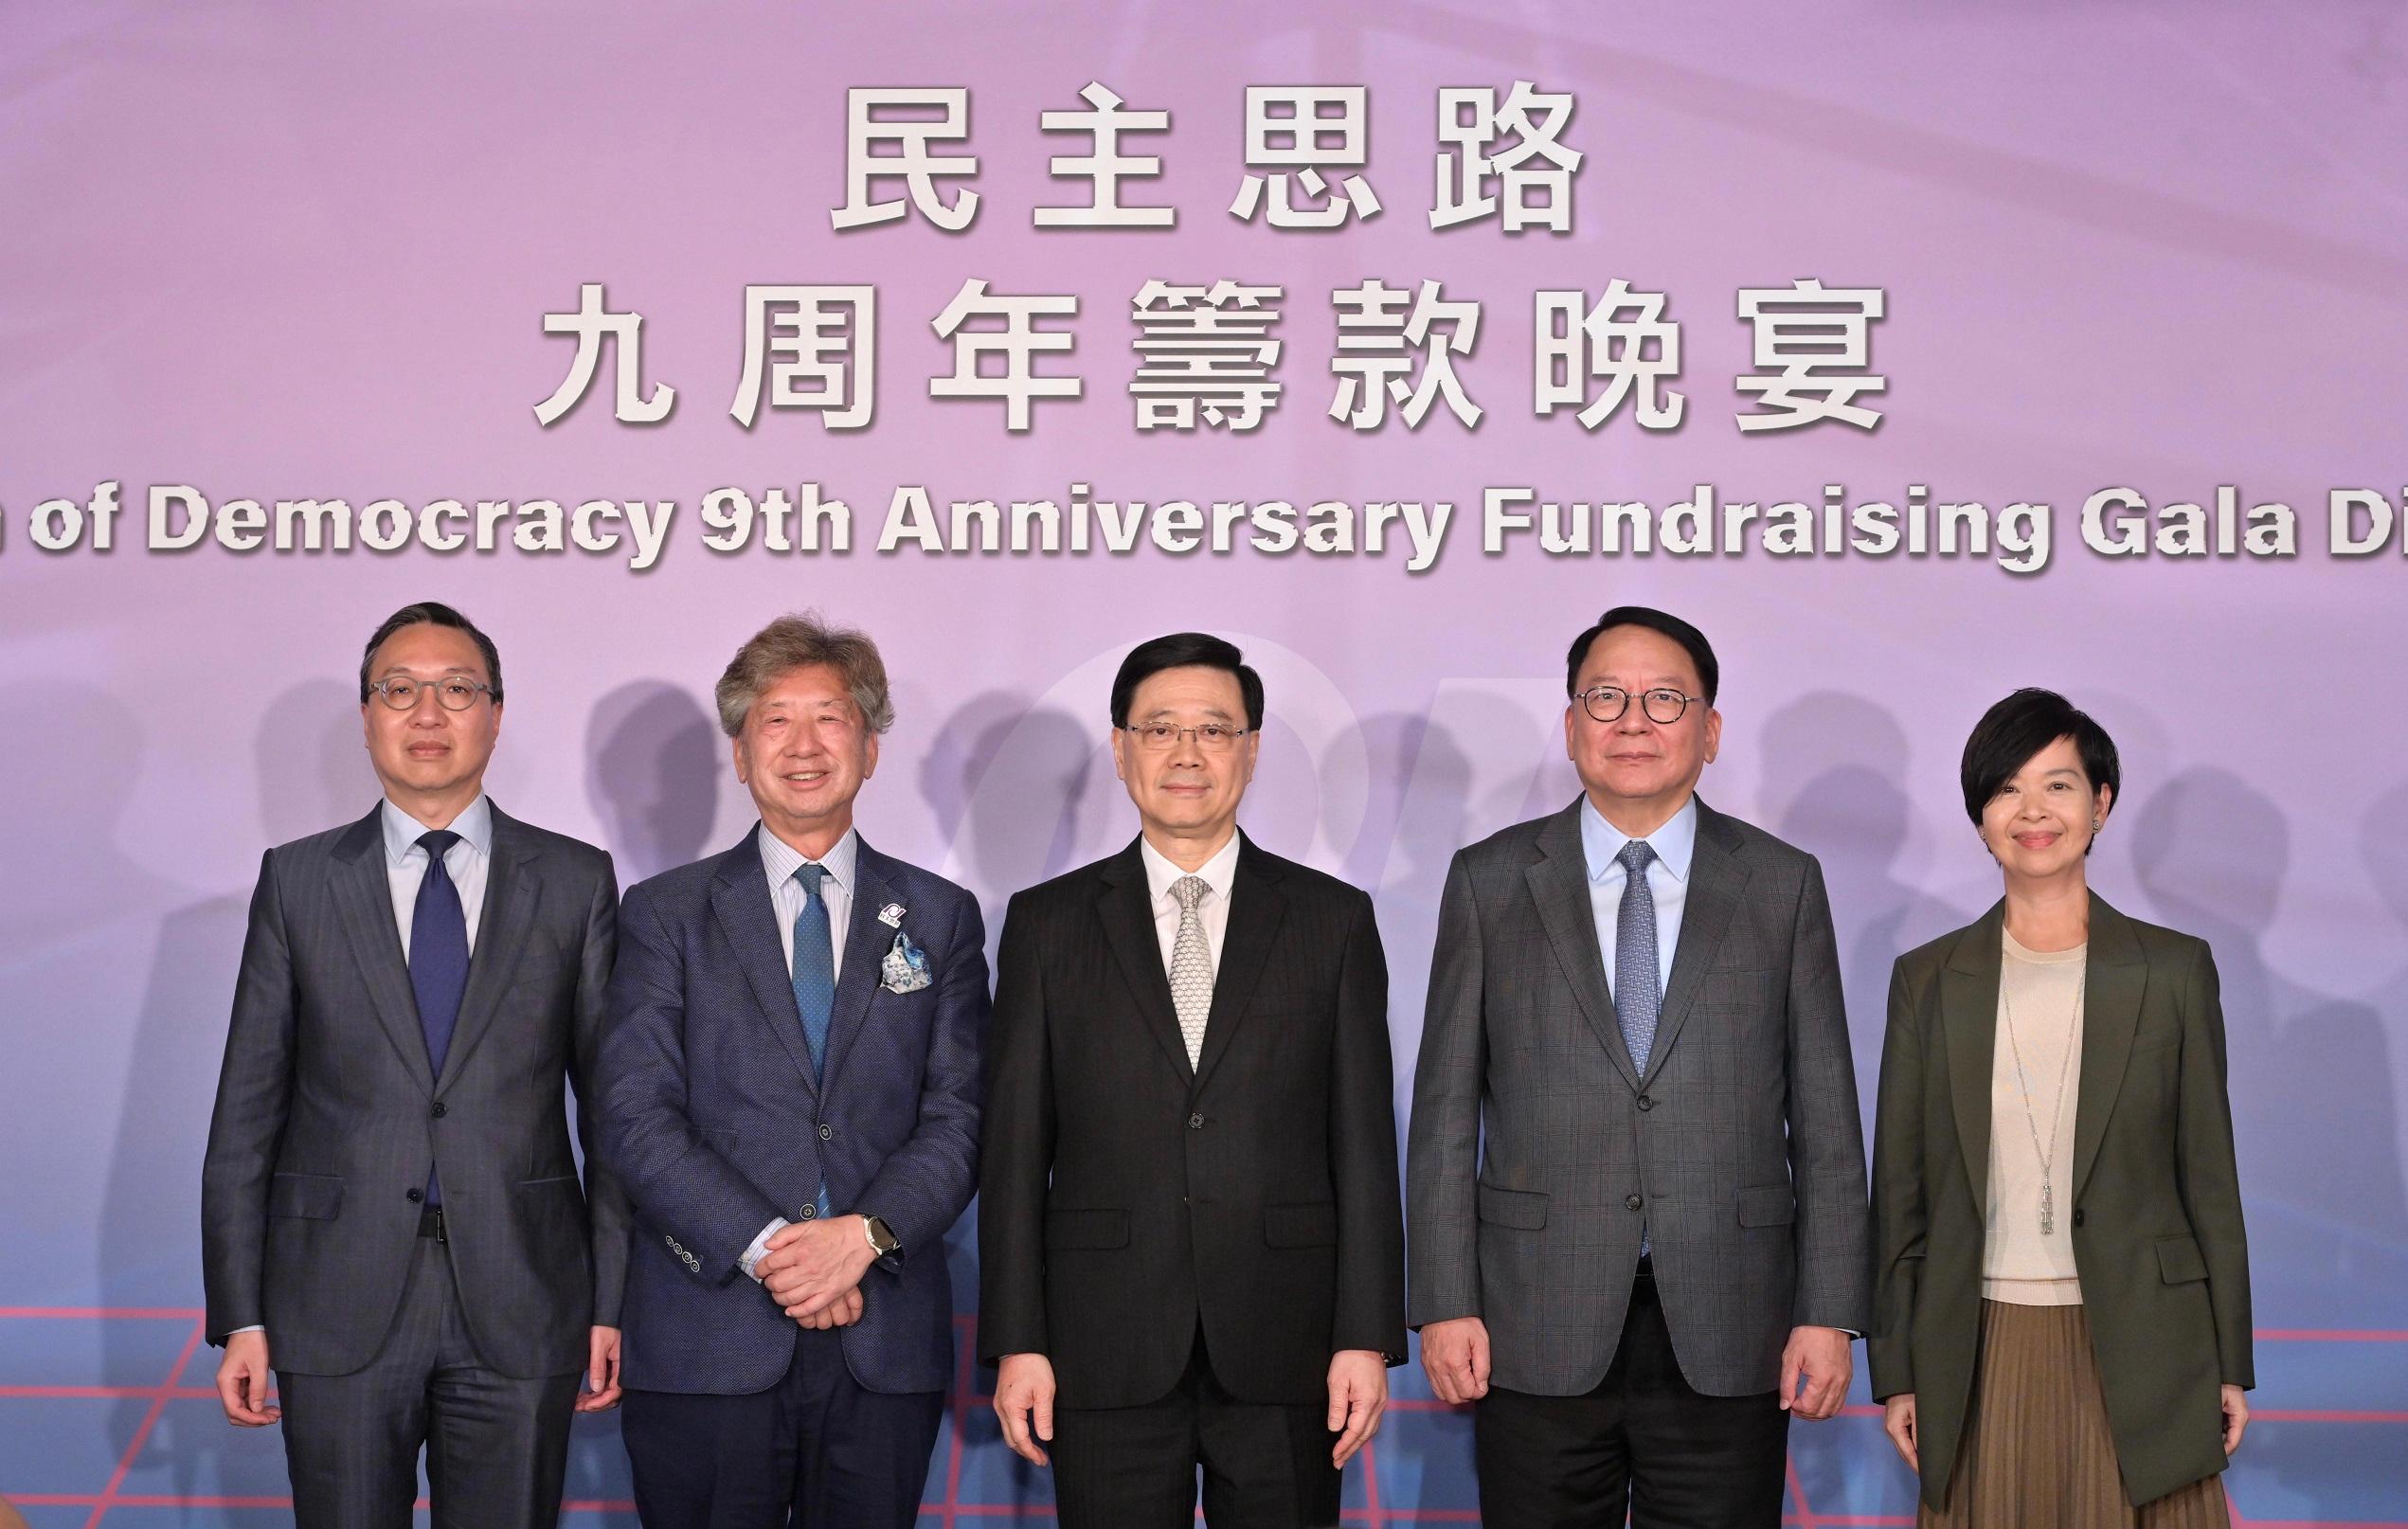 The Chief Executive, Mr John Lee, attended the Path of Democracy 9th Anniversary Fundraising Gala Dinner today (June 6). Photo shows (from left) the Secretary for Justice, Mr Paul Lam, SC; the Convenor of the Path of Democracy, Mr Ronny Tong; Mr Lee; the Chief Secretary for Administration, Mr Chan Kwok-ki; and the Secretary for Housing, Ms Winnie Ho, at the fundraising gala dinner.